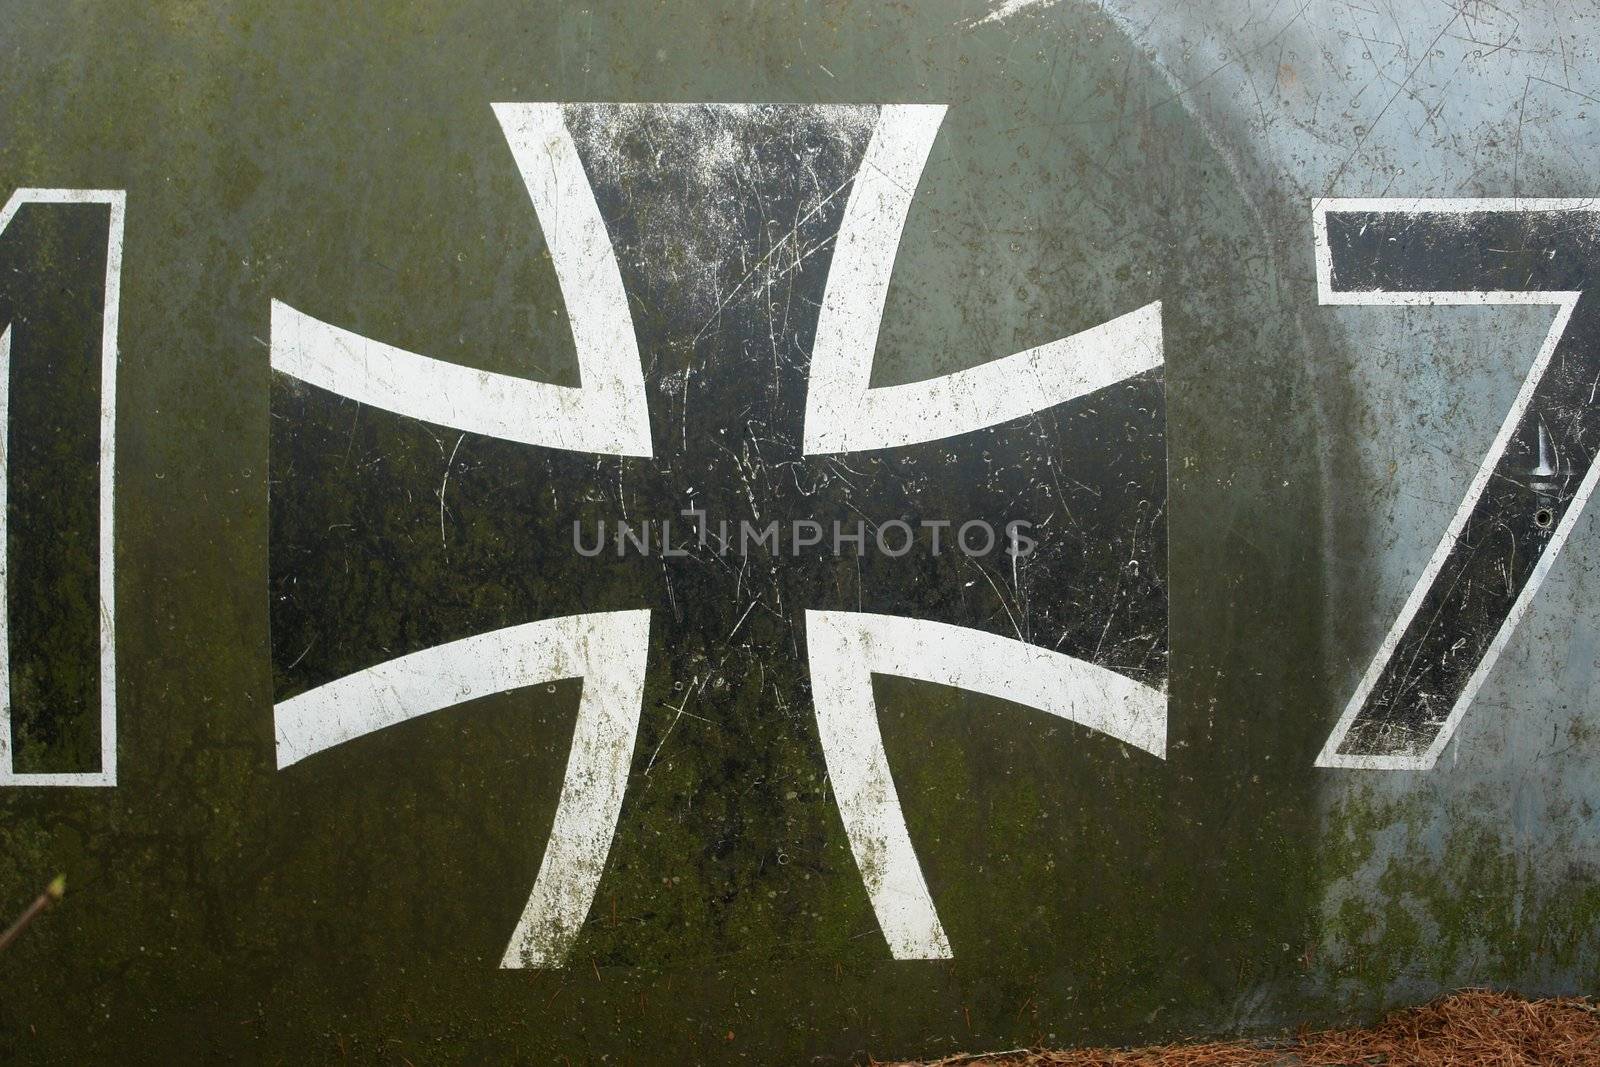 Details of an old grungy army aircraft..